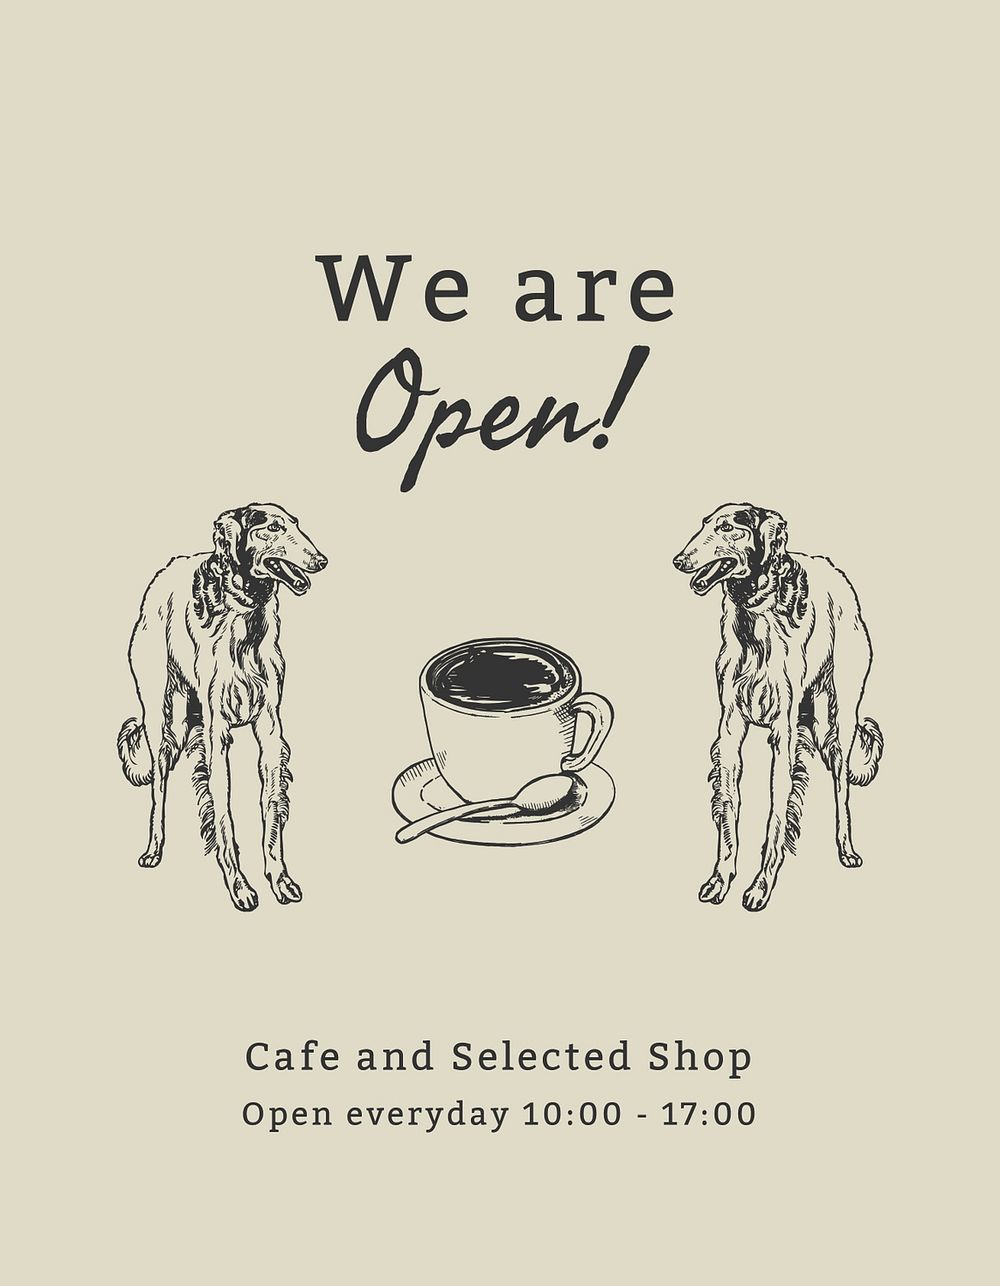 Coffee shop flyer template psd in vintage dog illustration theme, remixed from artworks by Moriz Jung